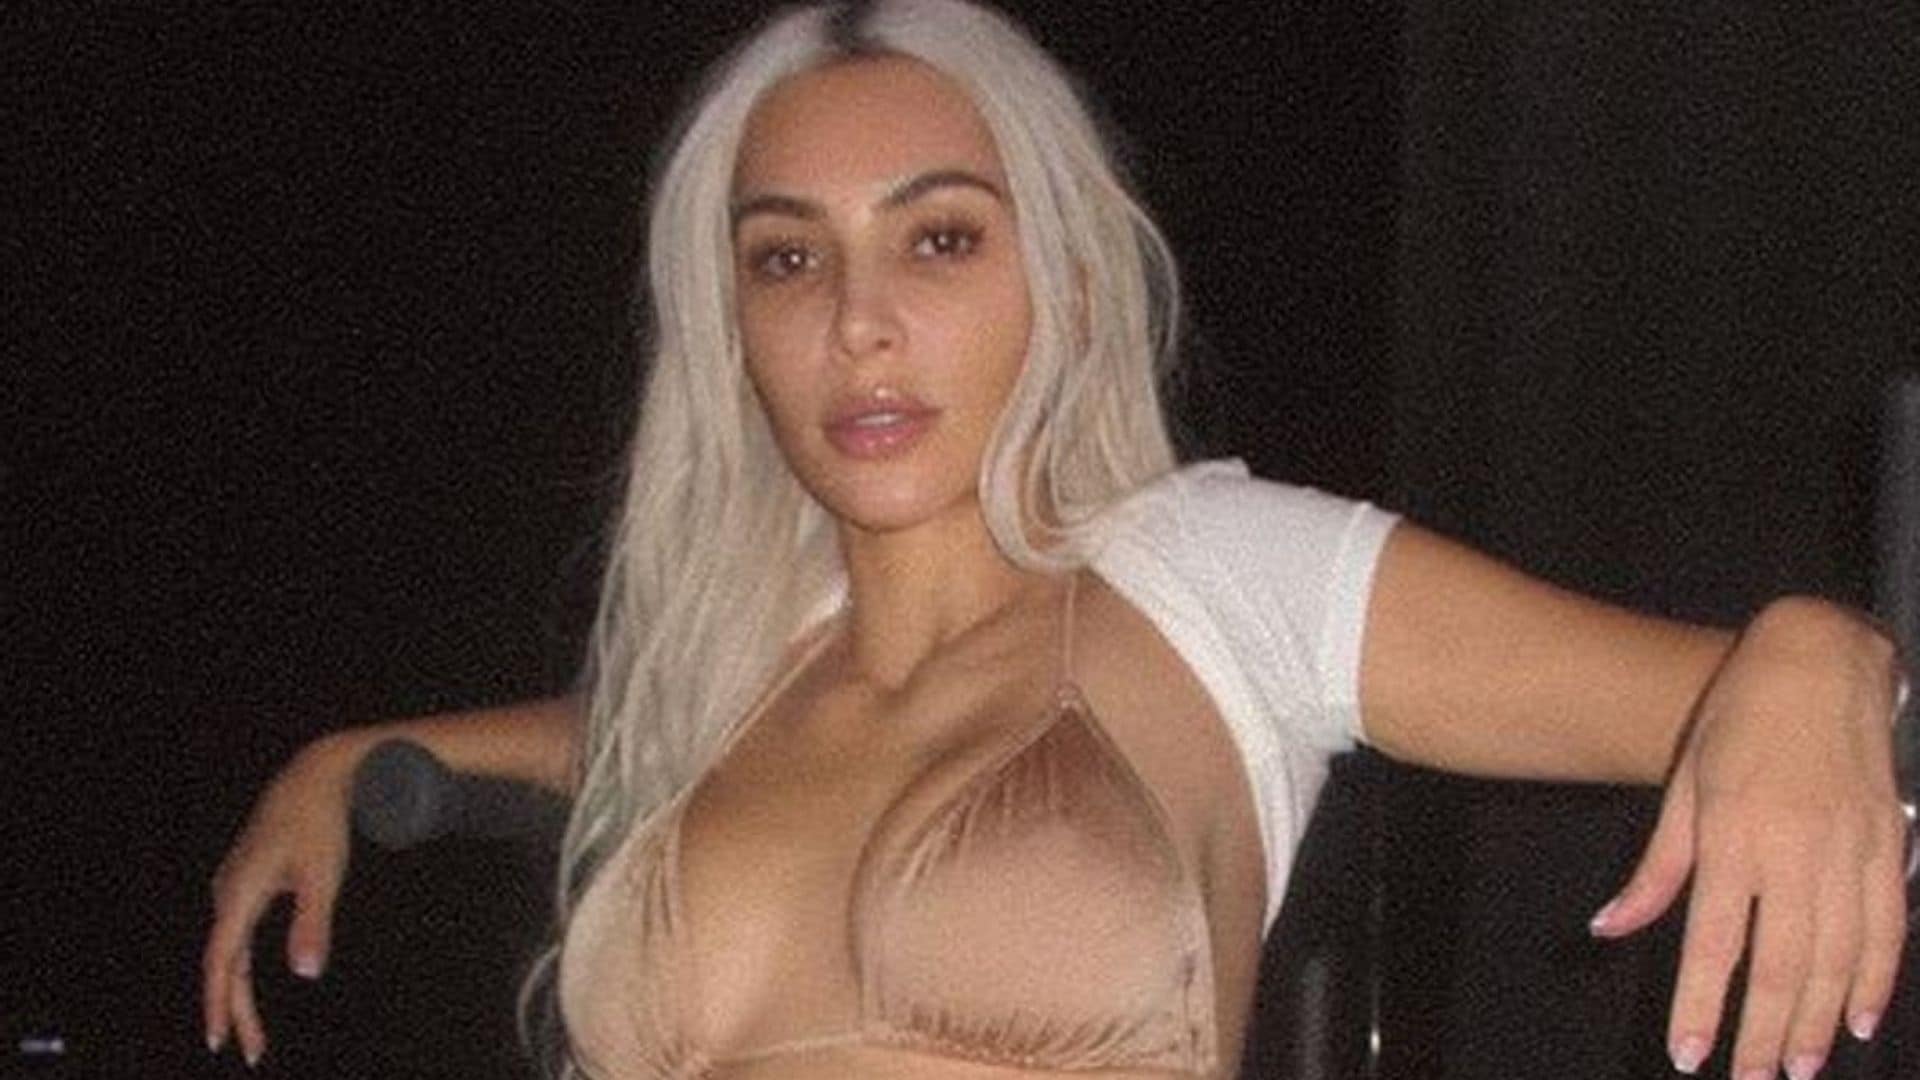 What Kim Kardashian is looking for in her next relationship